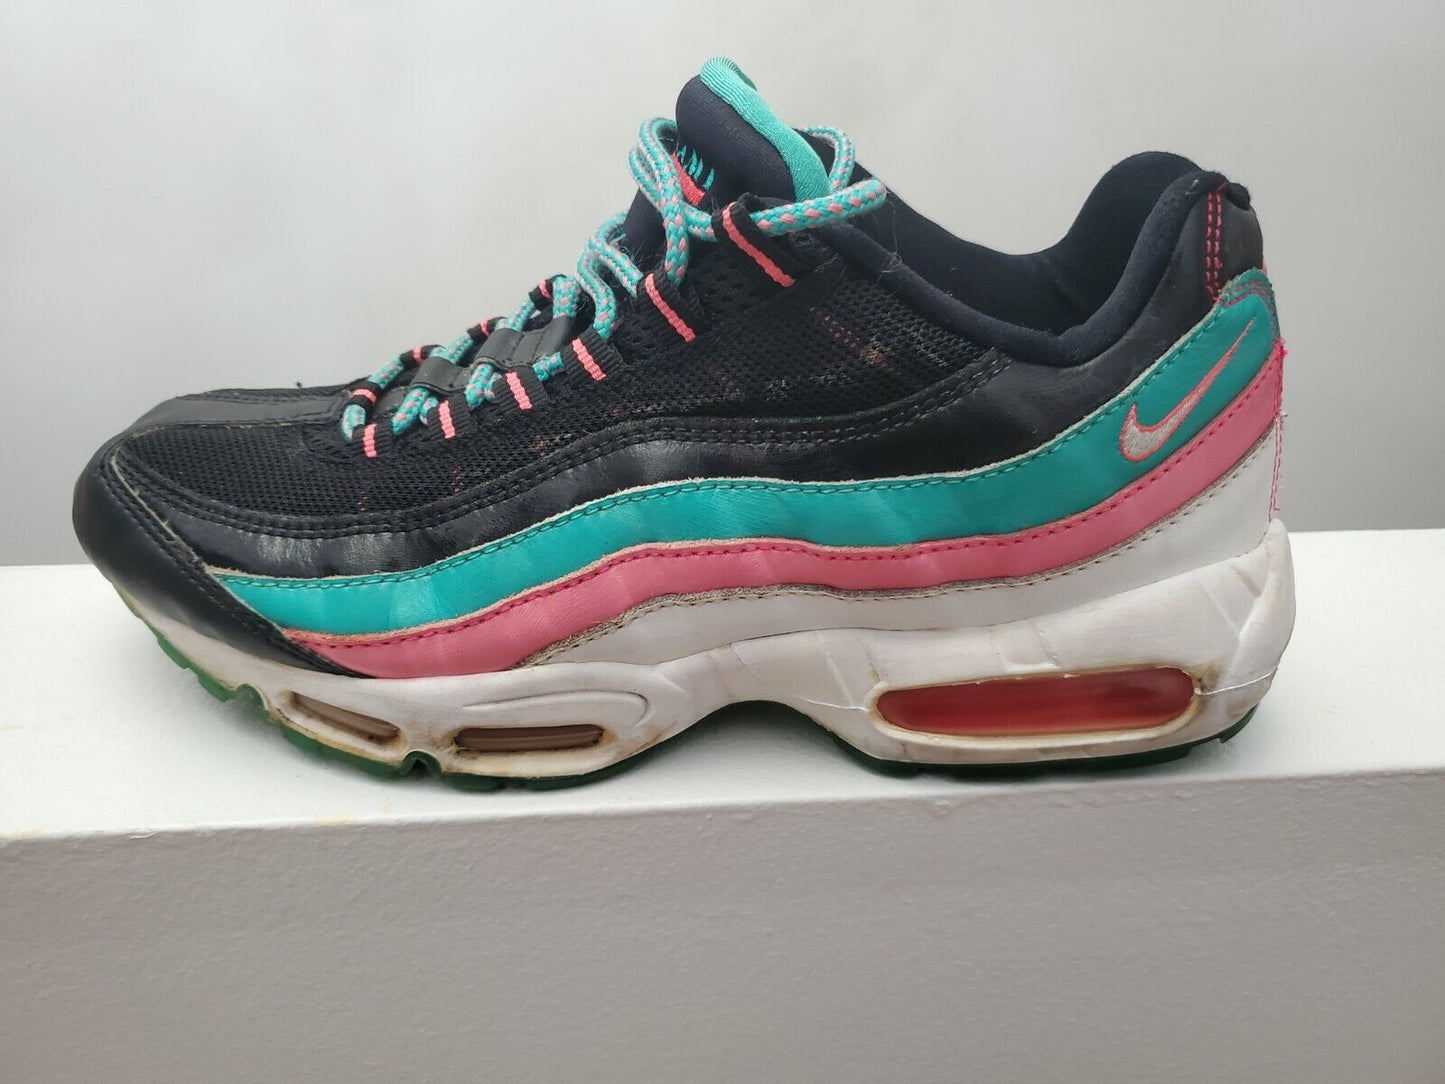 Mens 2008 Nike Air Max 95 Miami Vice Shoes Sneakers Size 9.5US